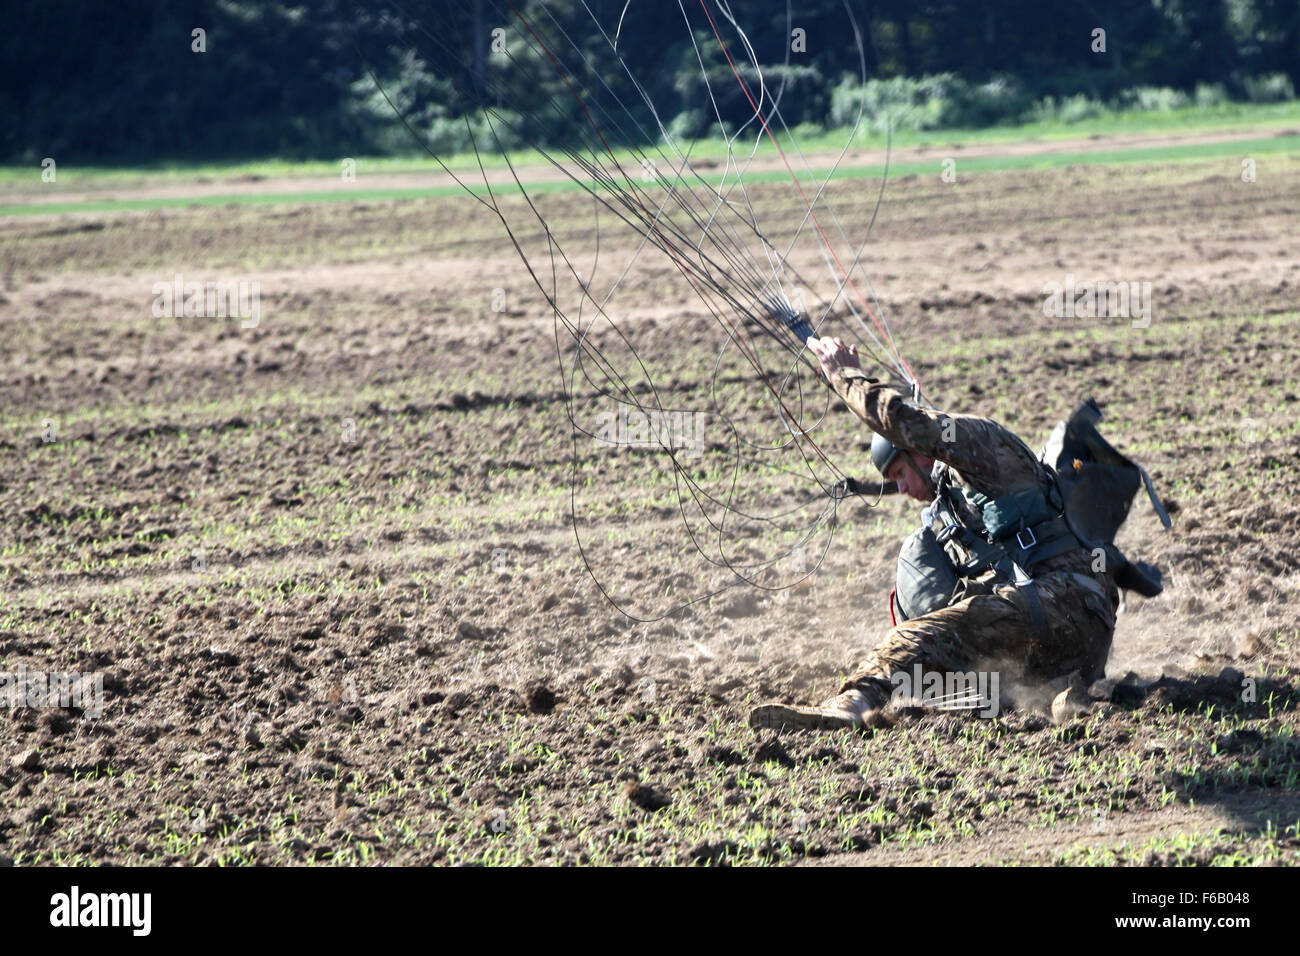 A U.S. paratrooper gets up after landing on the drop zone during Leapfest 2015 in West Kingston, R.I., Aug. 1, 2015. Leapfest is an International parachute competition hosted by the 56th Troop Command, Rhode Island National Guard to promote high level technical training and esprit de corps within the International Airborne community. (U.S. Army Photo by Spc. Joseph Cathey/Released) Stock Photo